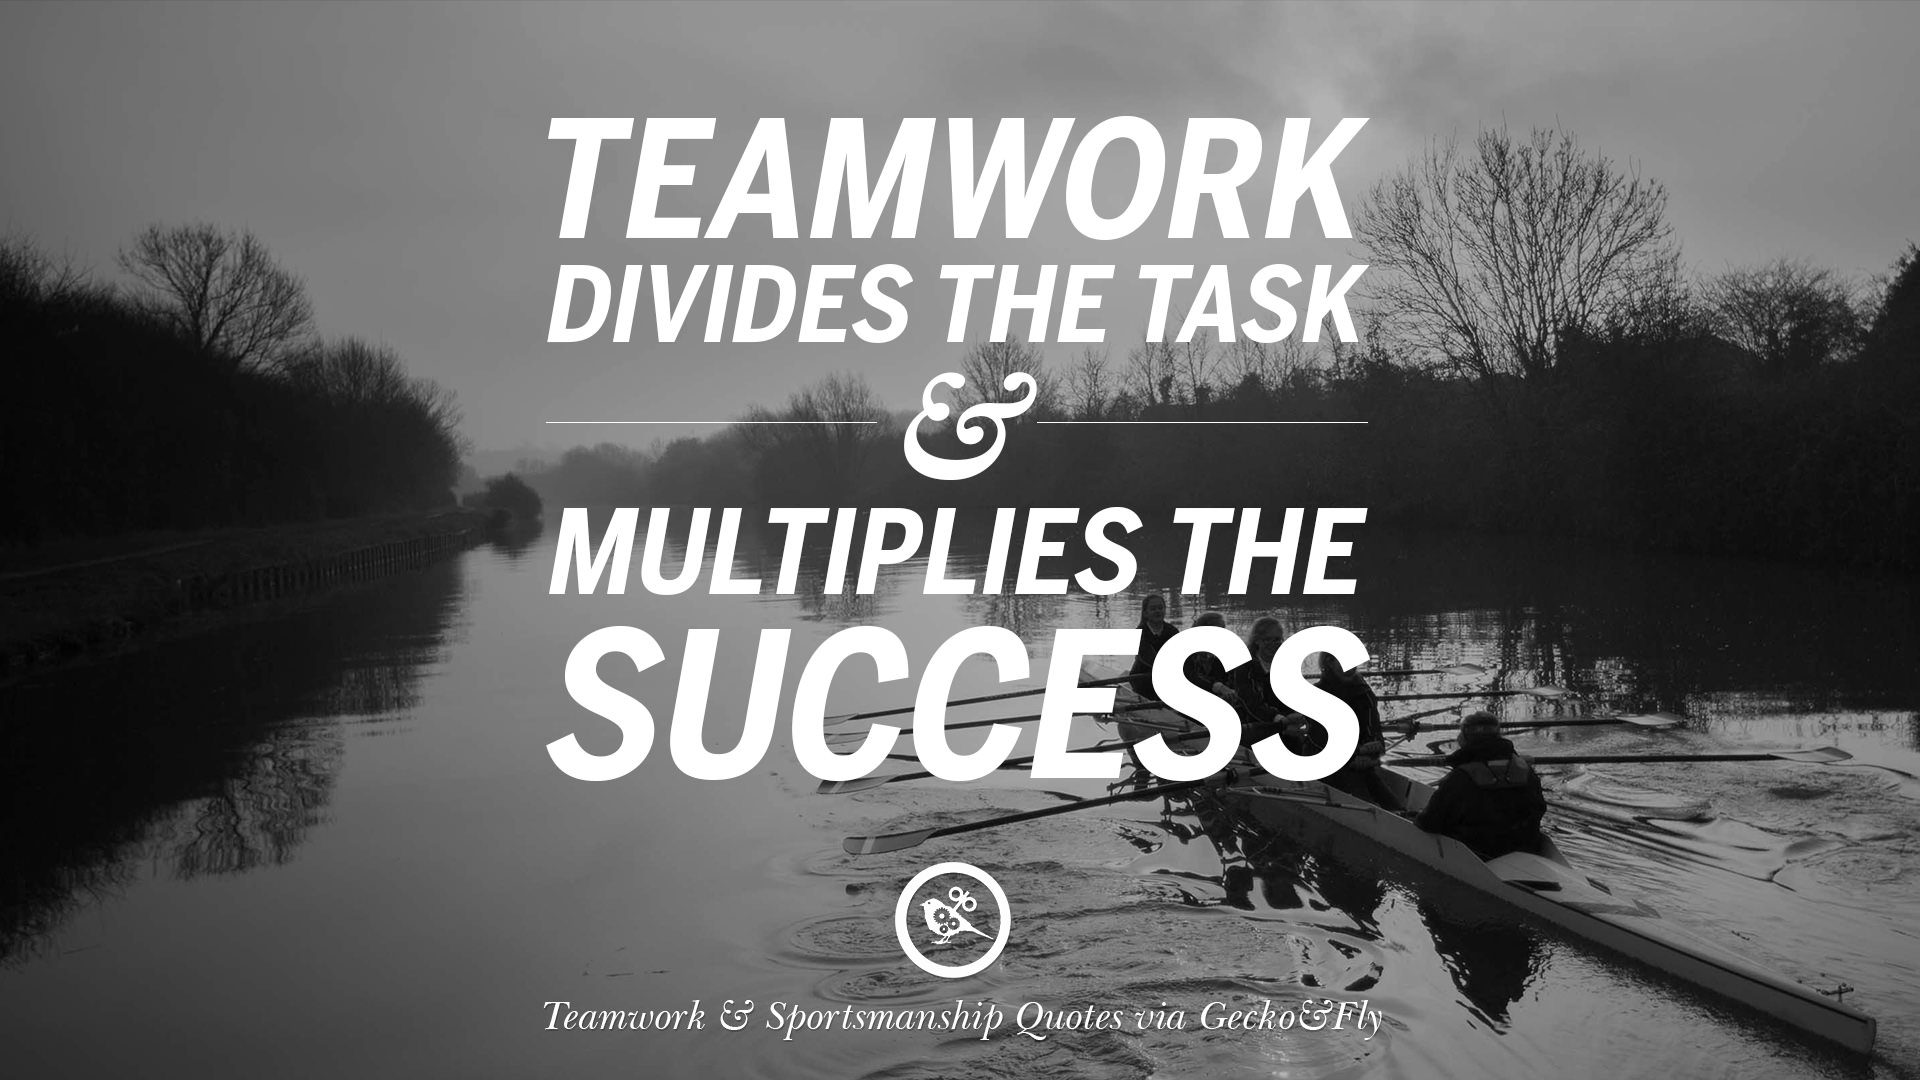 teamwork divides the task and multiplies the success